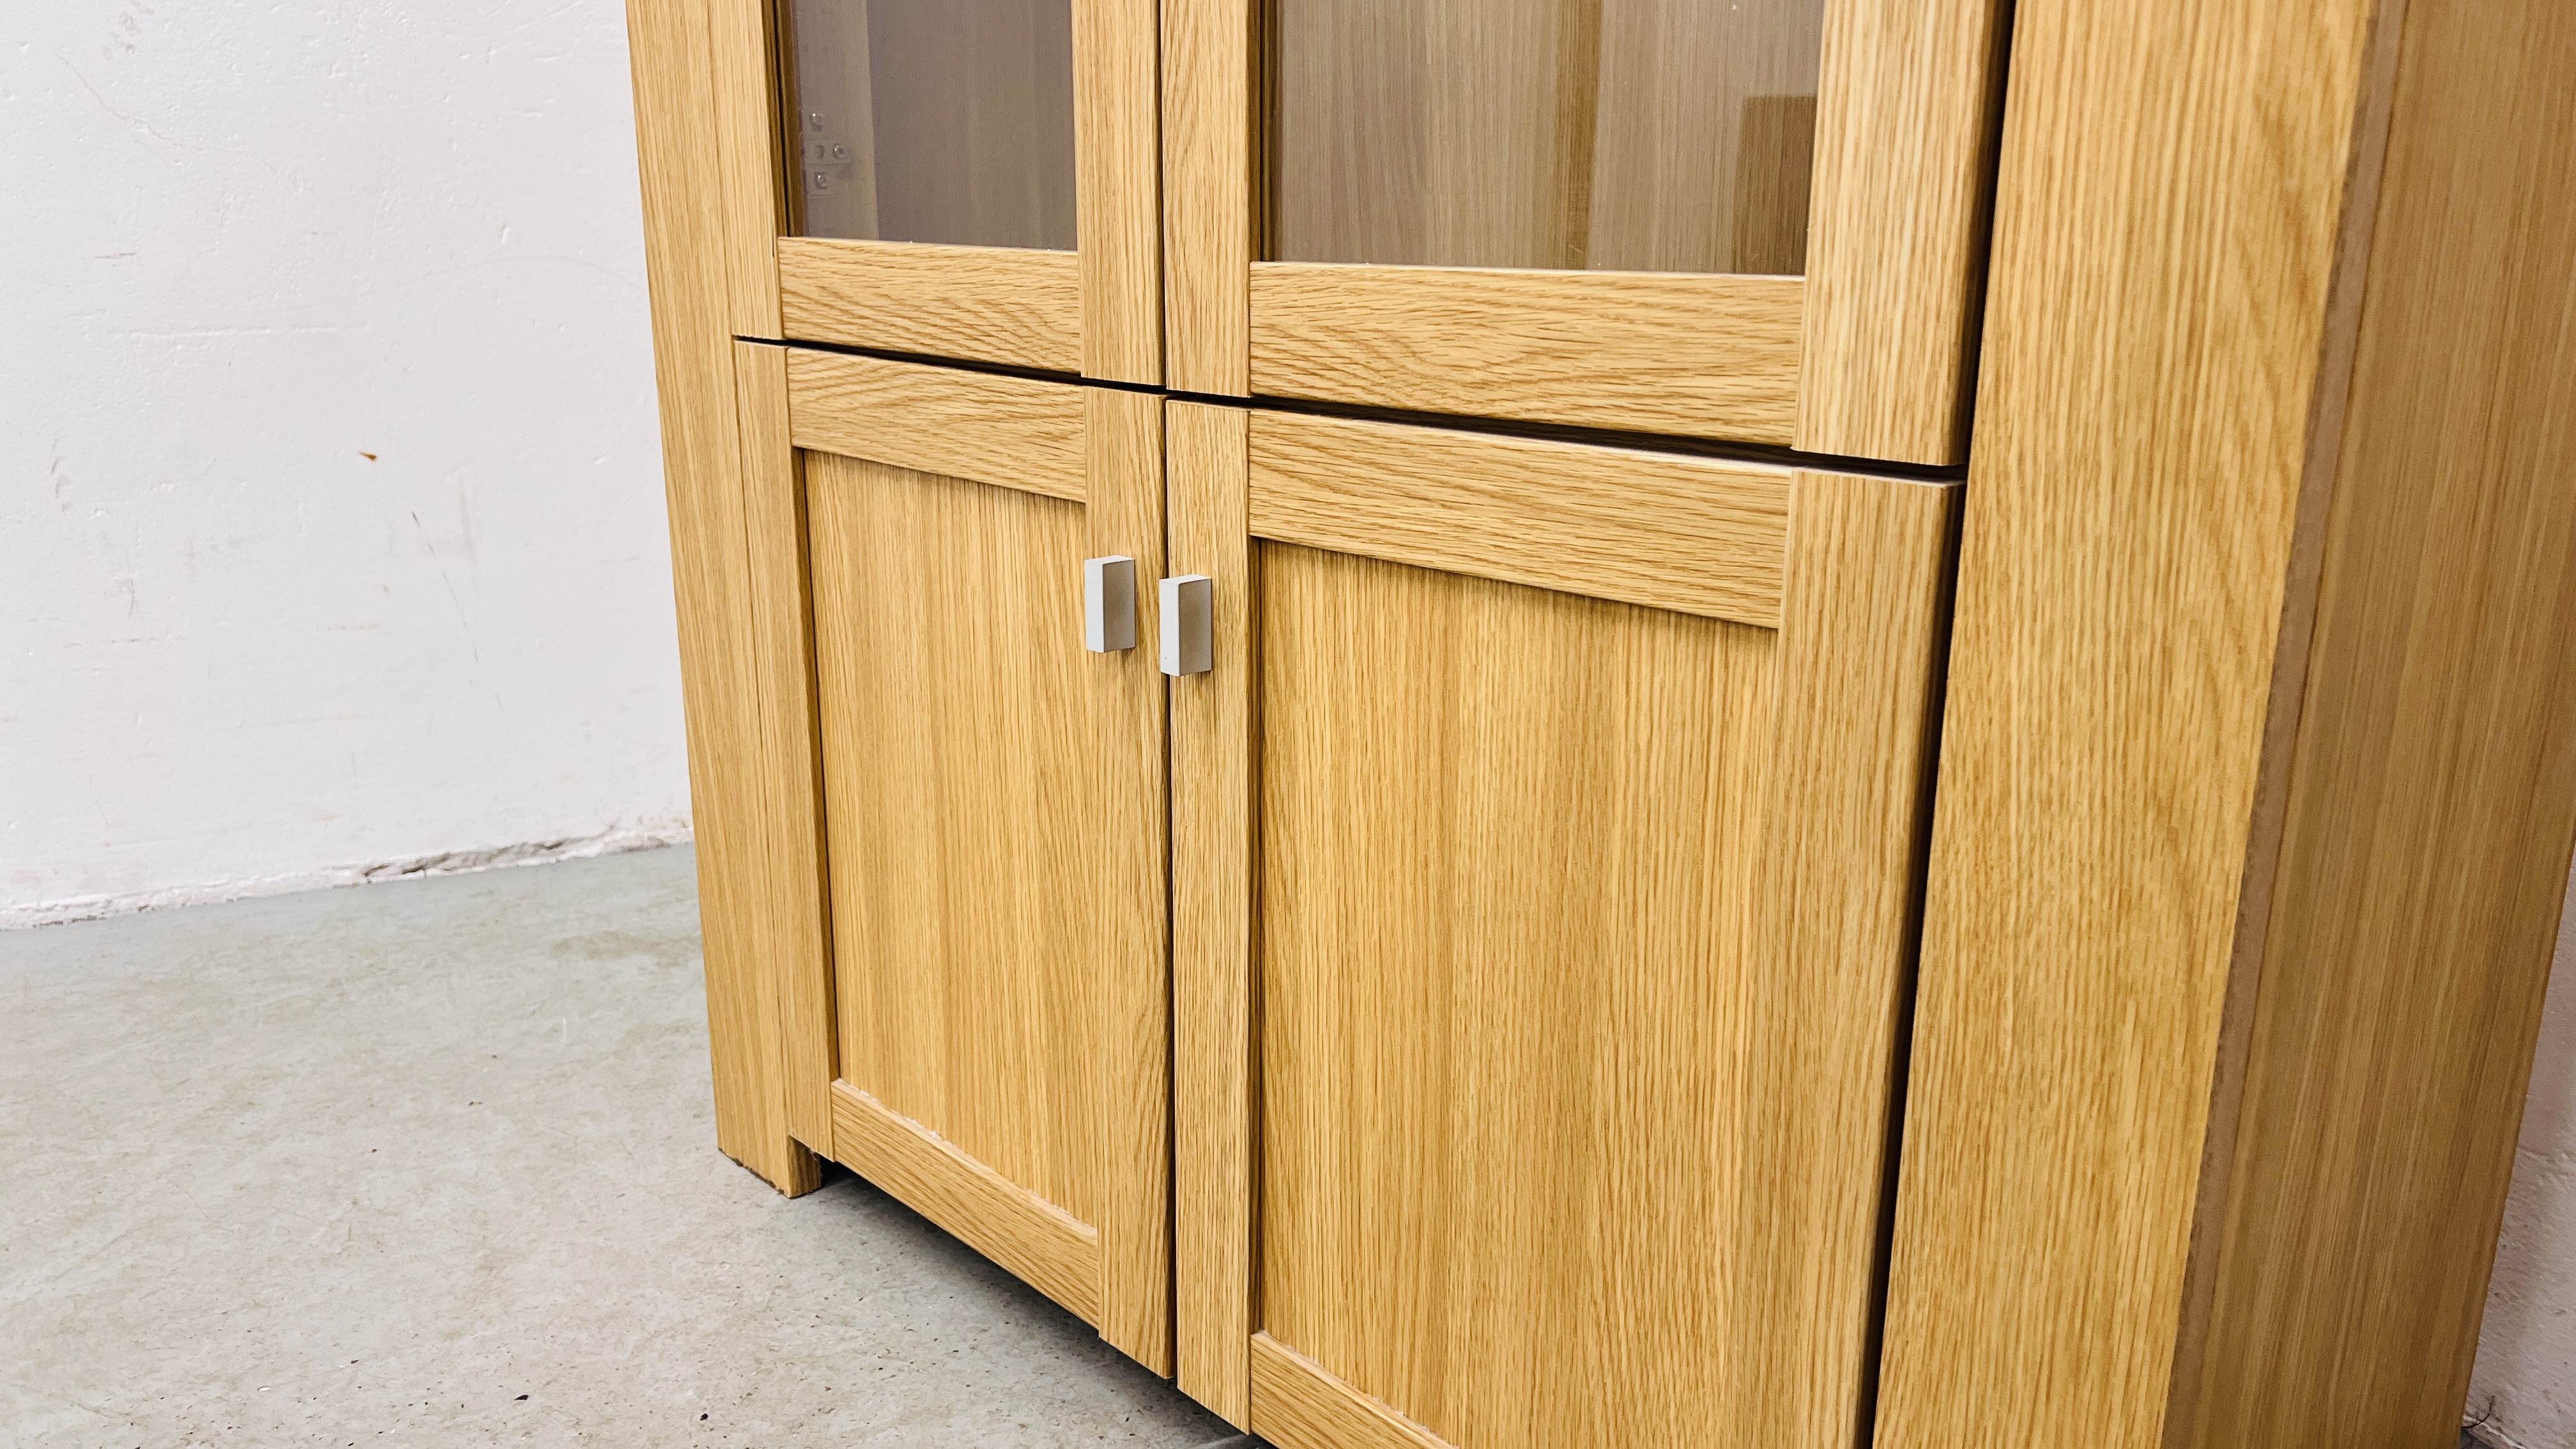 A MODERN LIGHT OAK FINISH DISPLAY CABINET WITH CUPBOARD BASE - W 100CM. D 40CM. H 188CM. - Image 4 of 8